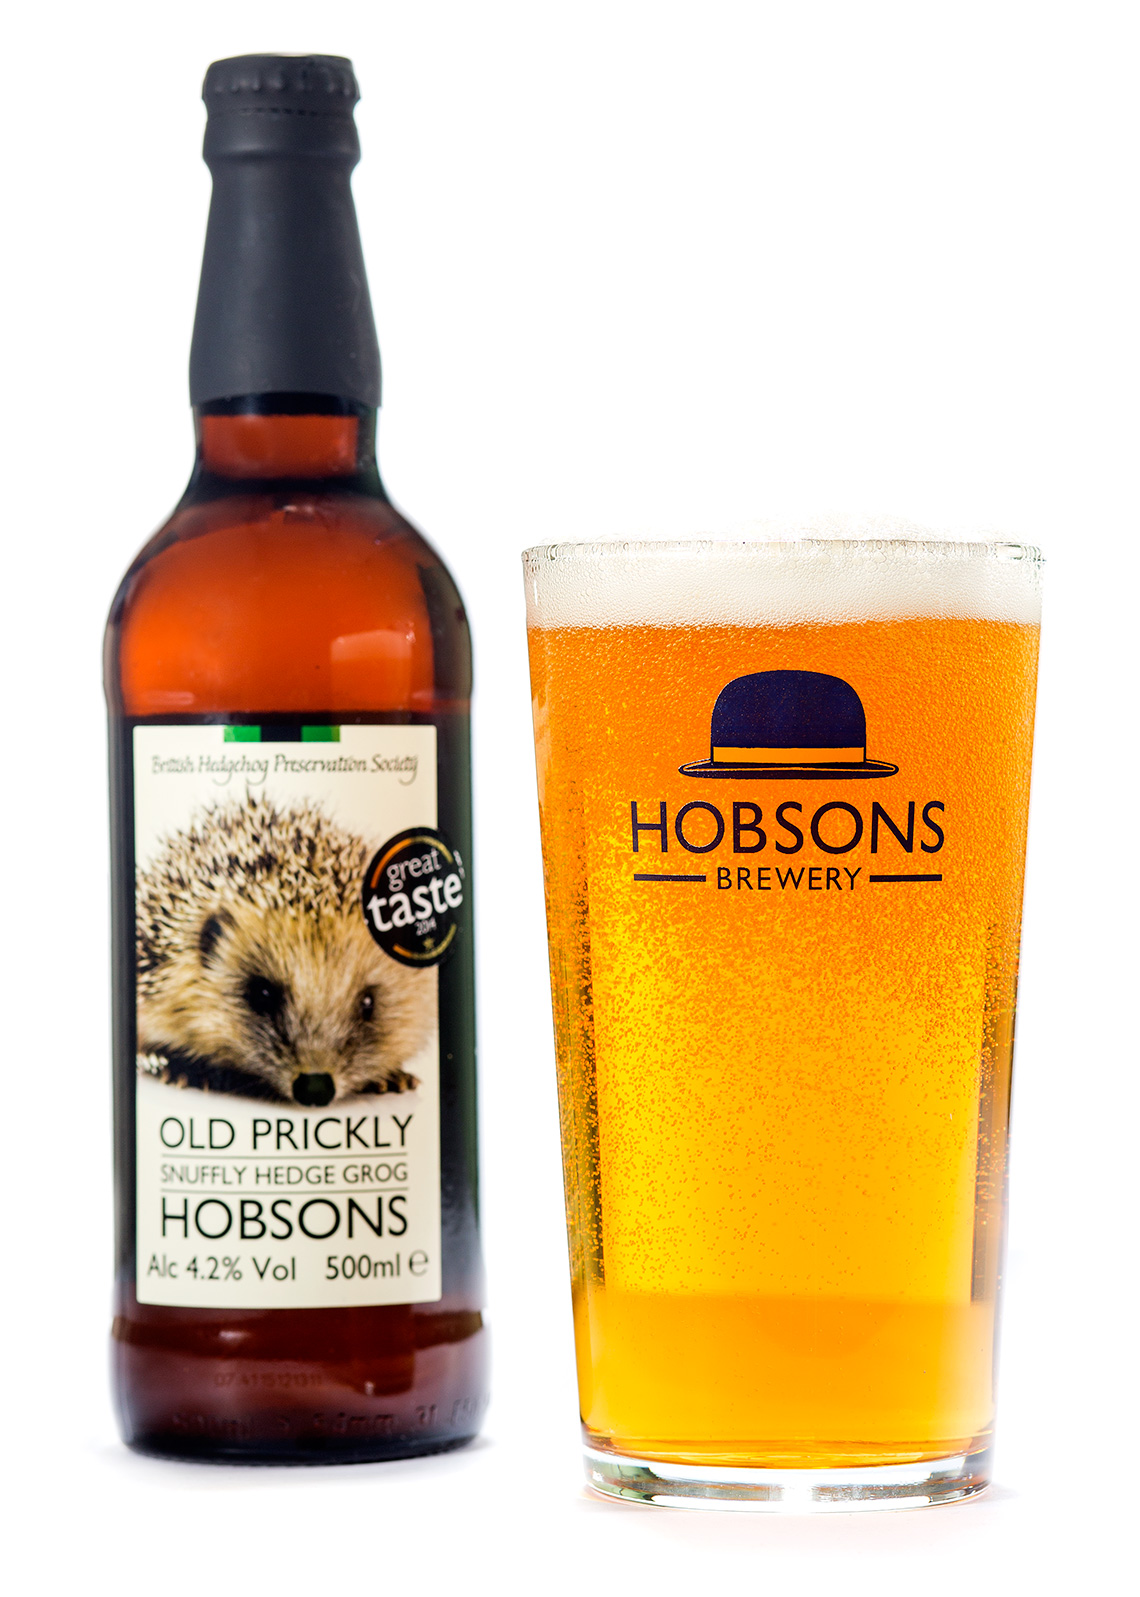 Commercial studio product photography of a pint and bottle of Hobsons Old Prickly Snuffly Hedge Grog.